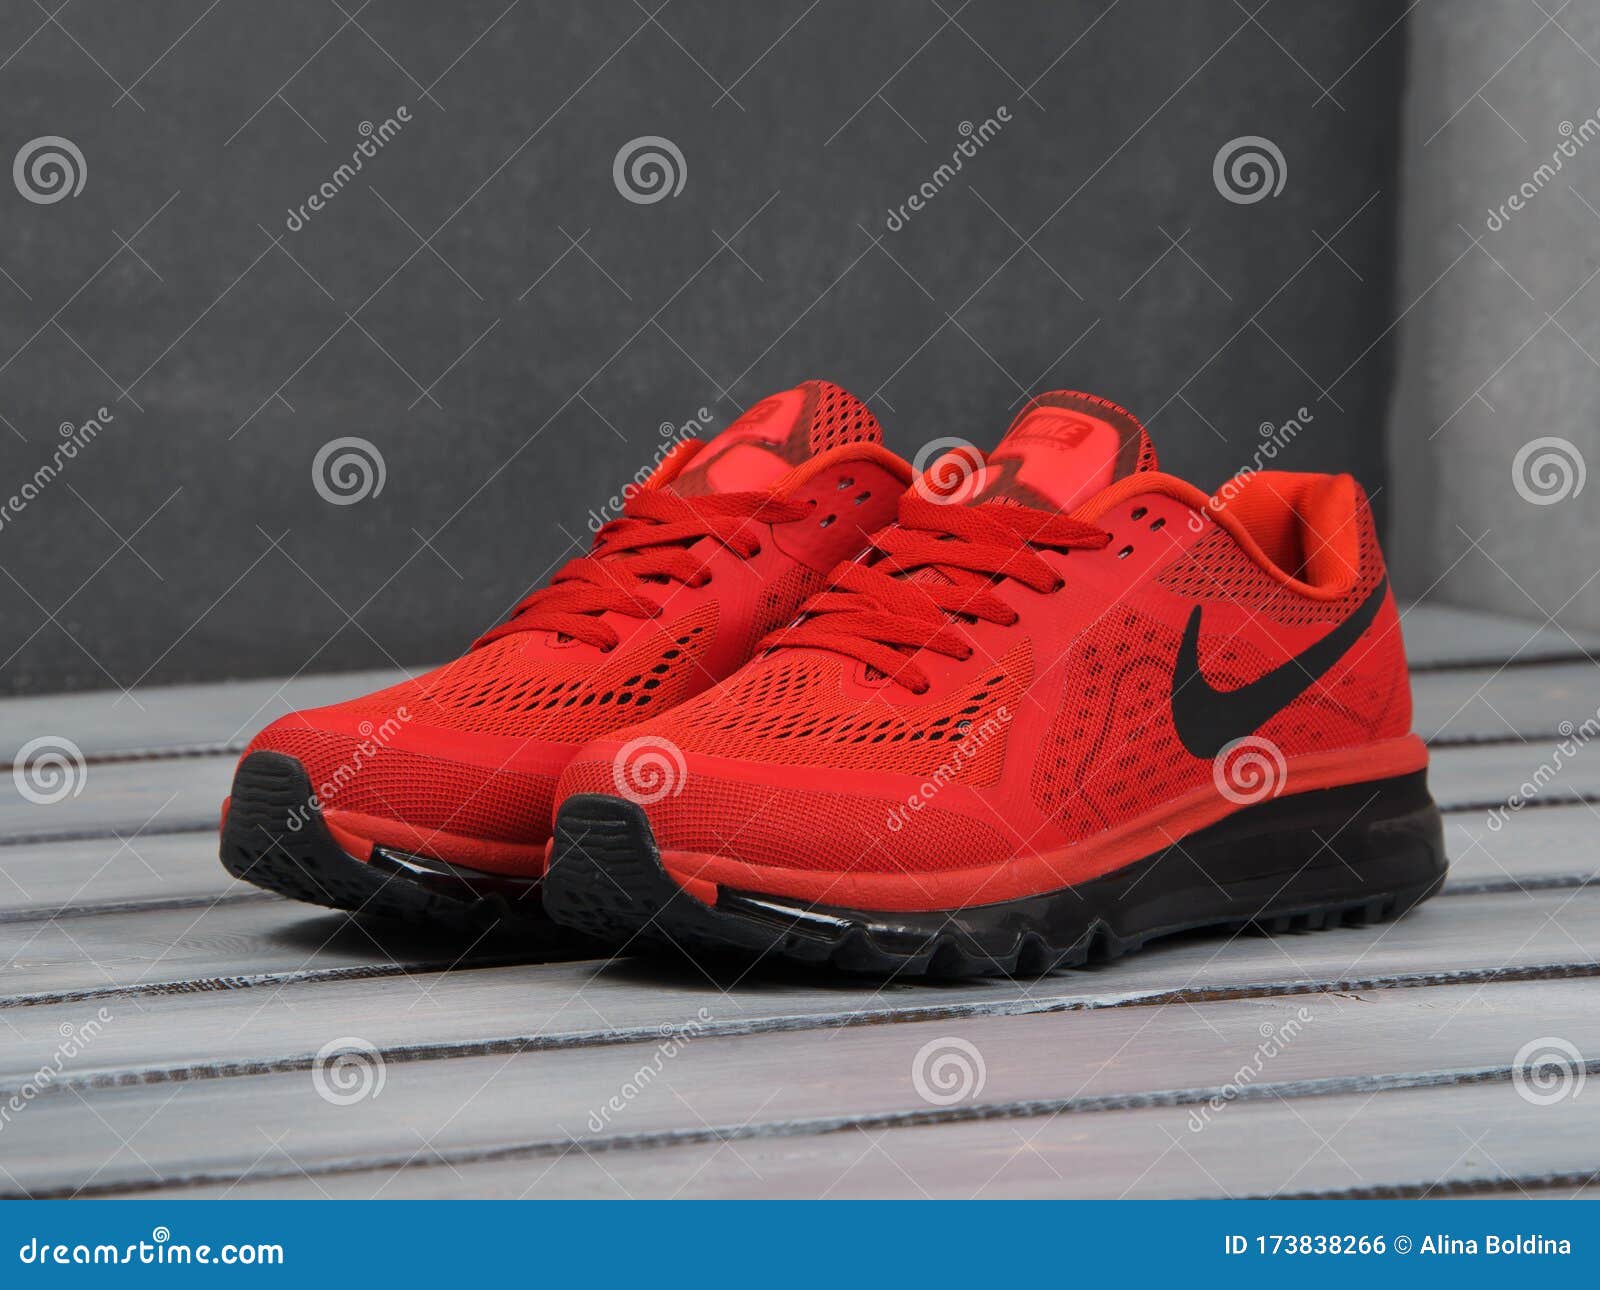 Nike Air Max 2014 Red Online Sale, UP 